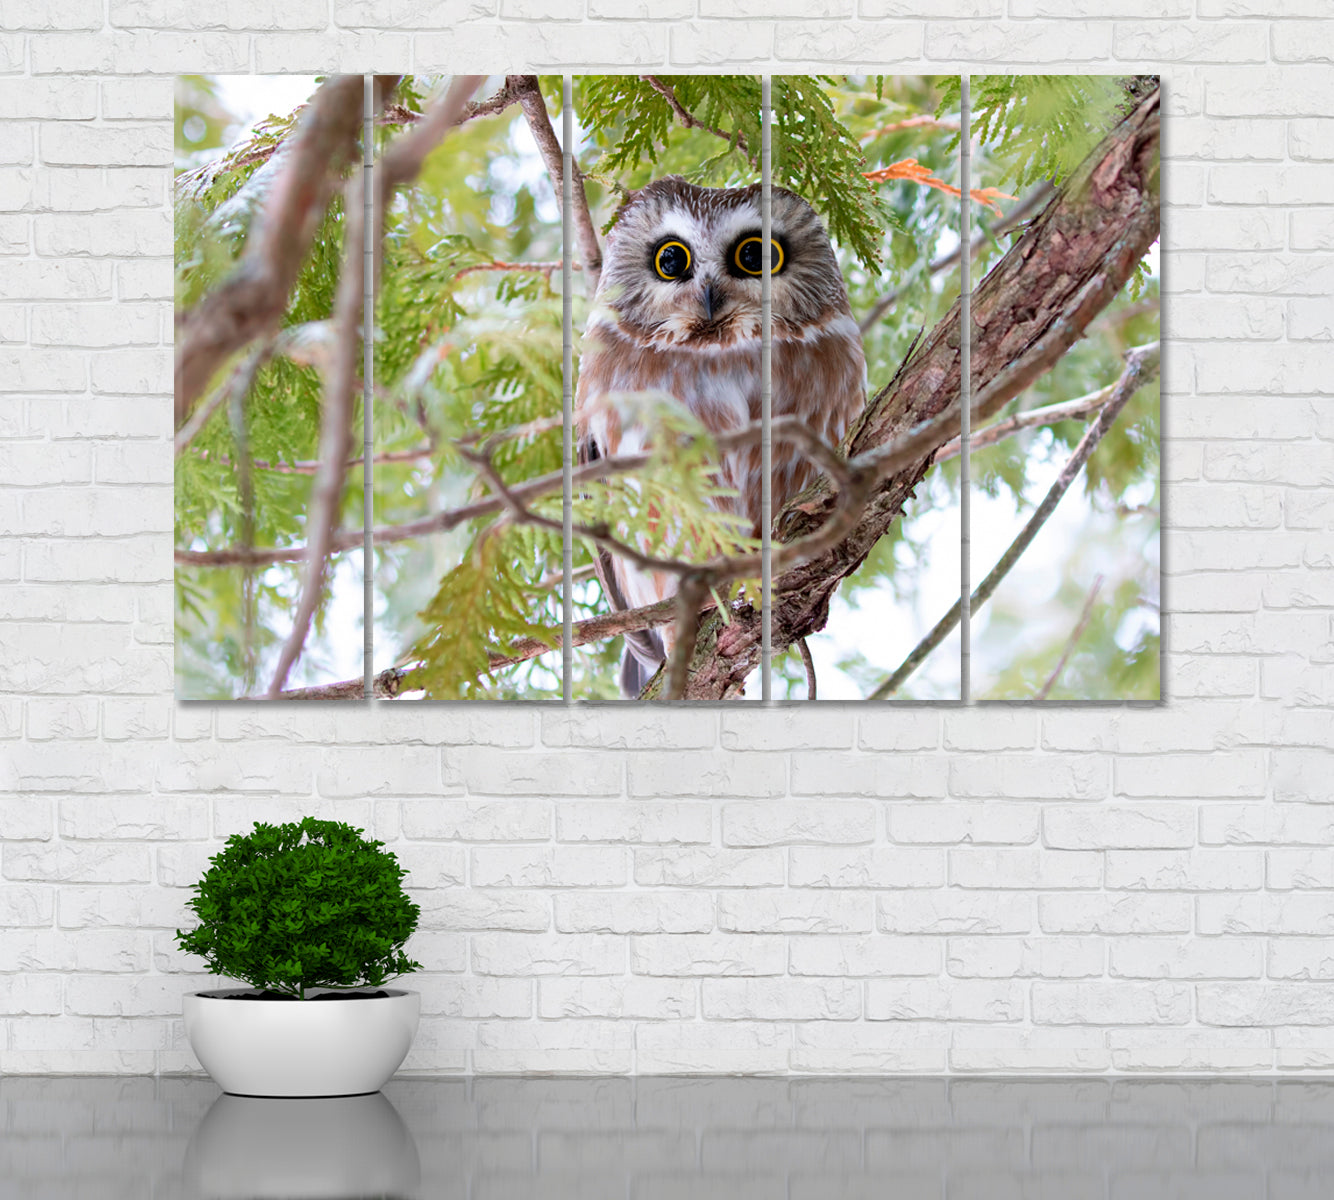 Northern Saw-Whet Owl Canvas Print ArtLexy 5 Panels 36"x24" inches 